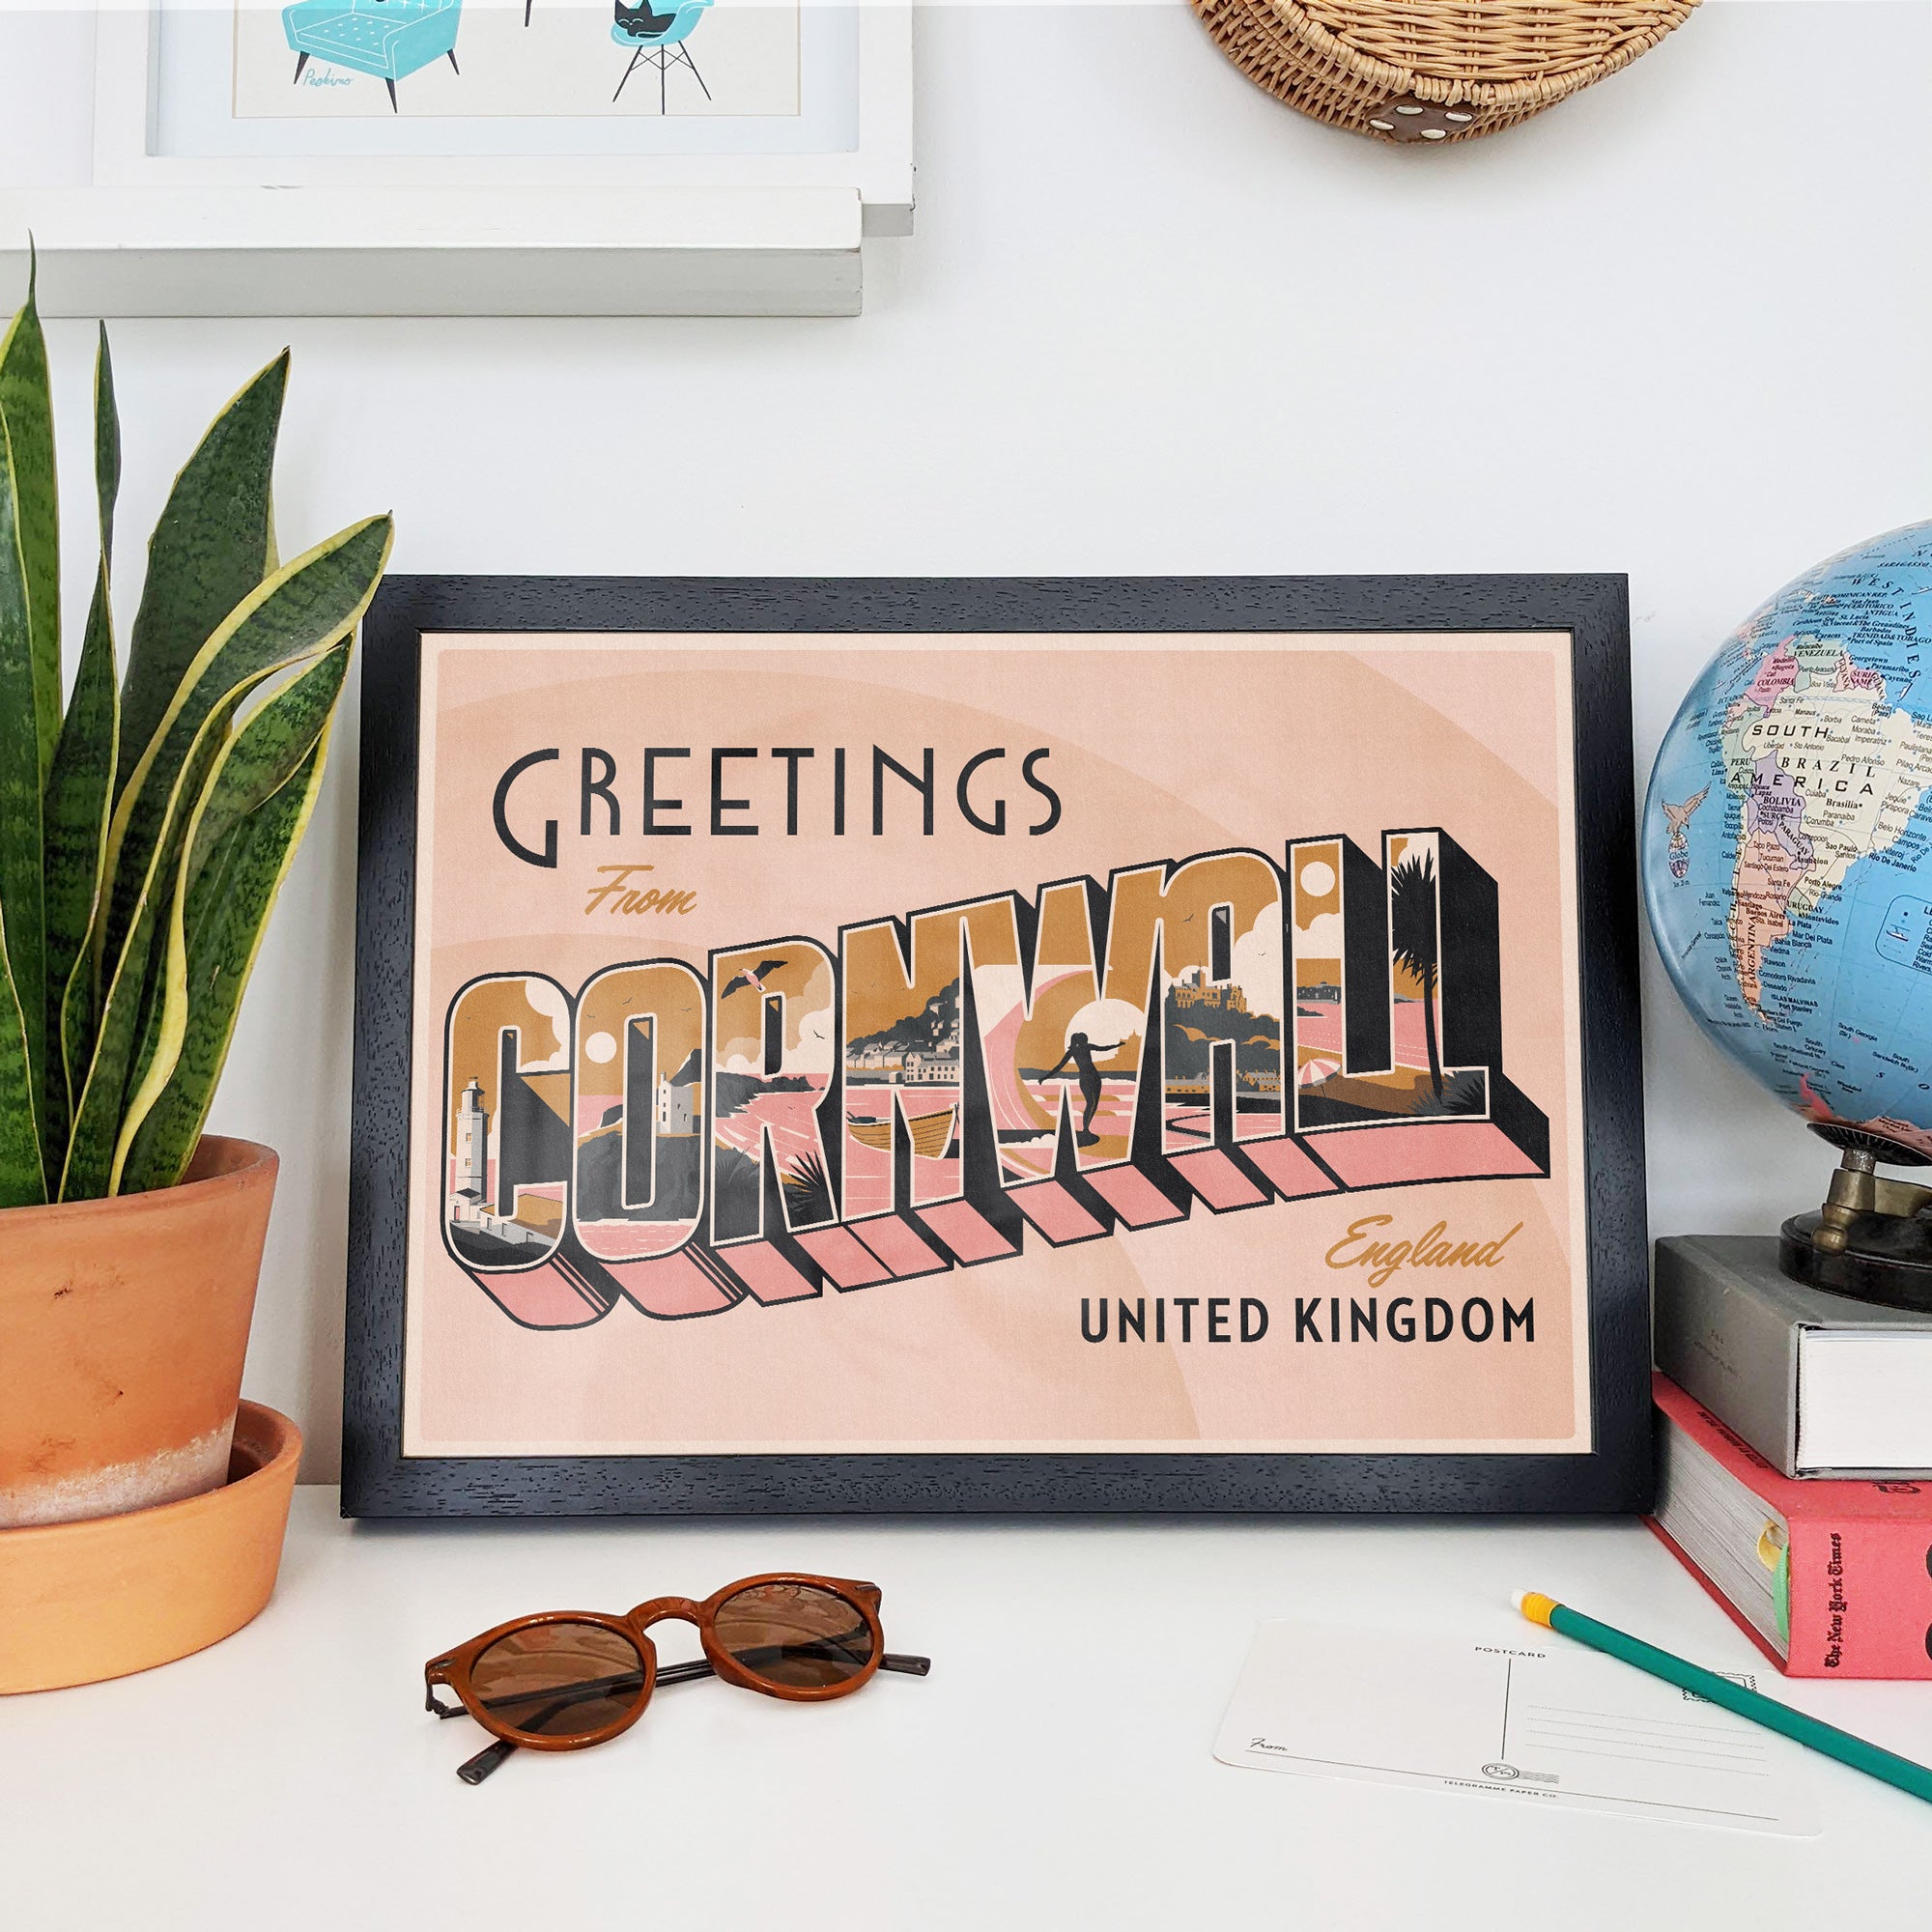 Greetings From Cornwall vintage inspired travel wall art